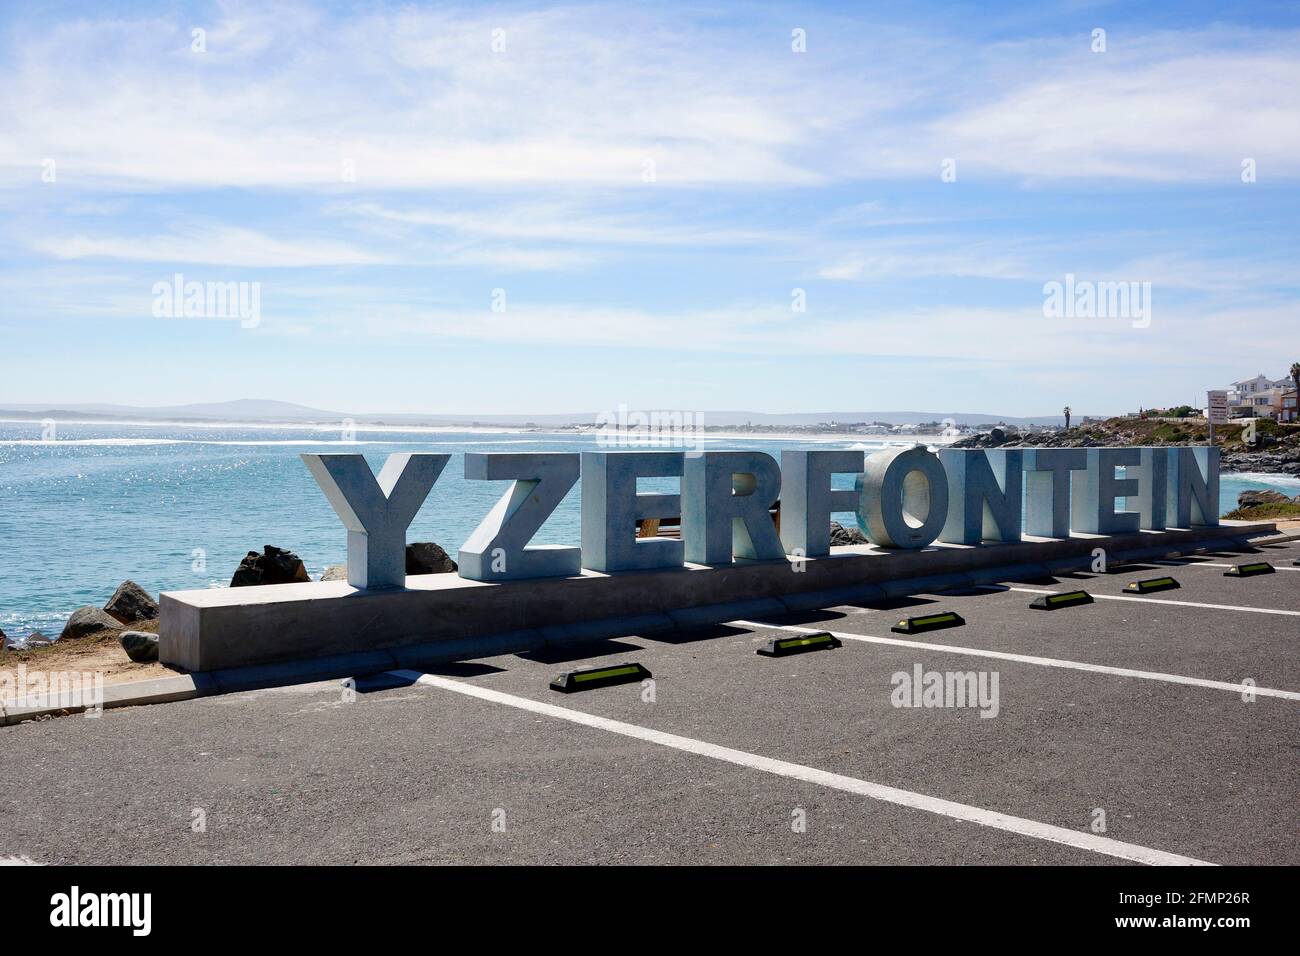 Yzerfontein on the West coast of the Western Cape Province of South Africa. Stock Photo